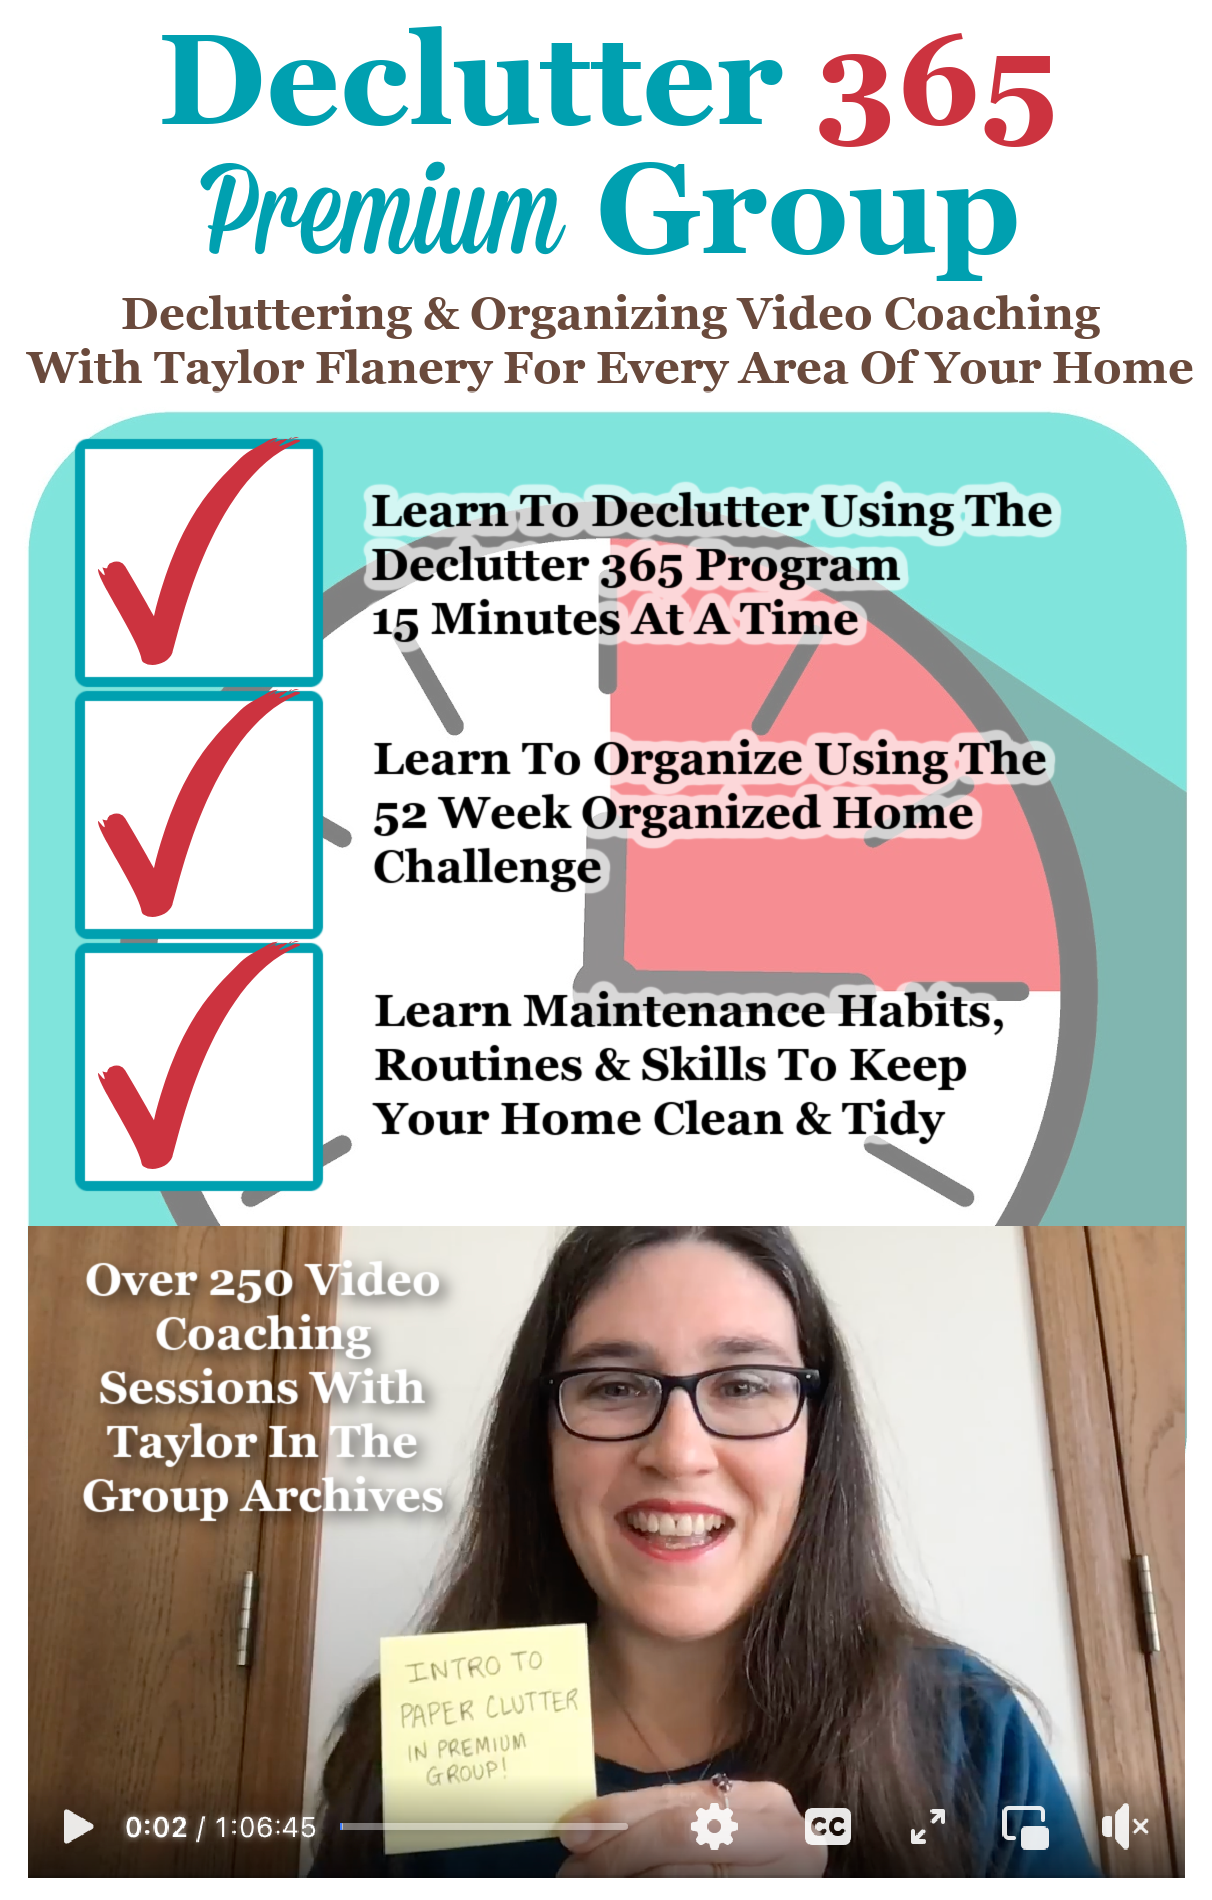 Here's how to get a membership to the Declutter 365 Premium Facebook group for 2024, to get access to the video archives for decluttering and organizing tips, monthly group coaching sessions, and encouragement and accountability with Taylor, to declutter, organize and maintain your home {on Home Storage Solutions 101} #Declutter365 #DeclutterHelp #DeclutteringTips